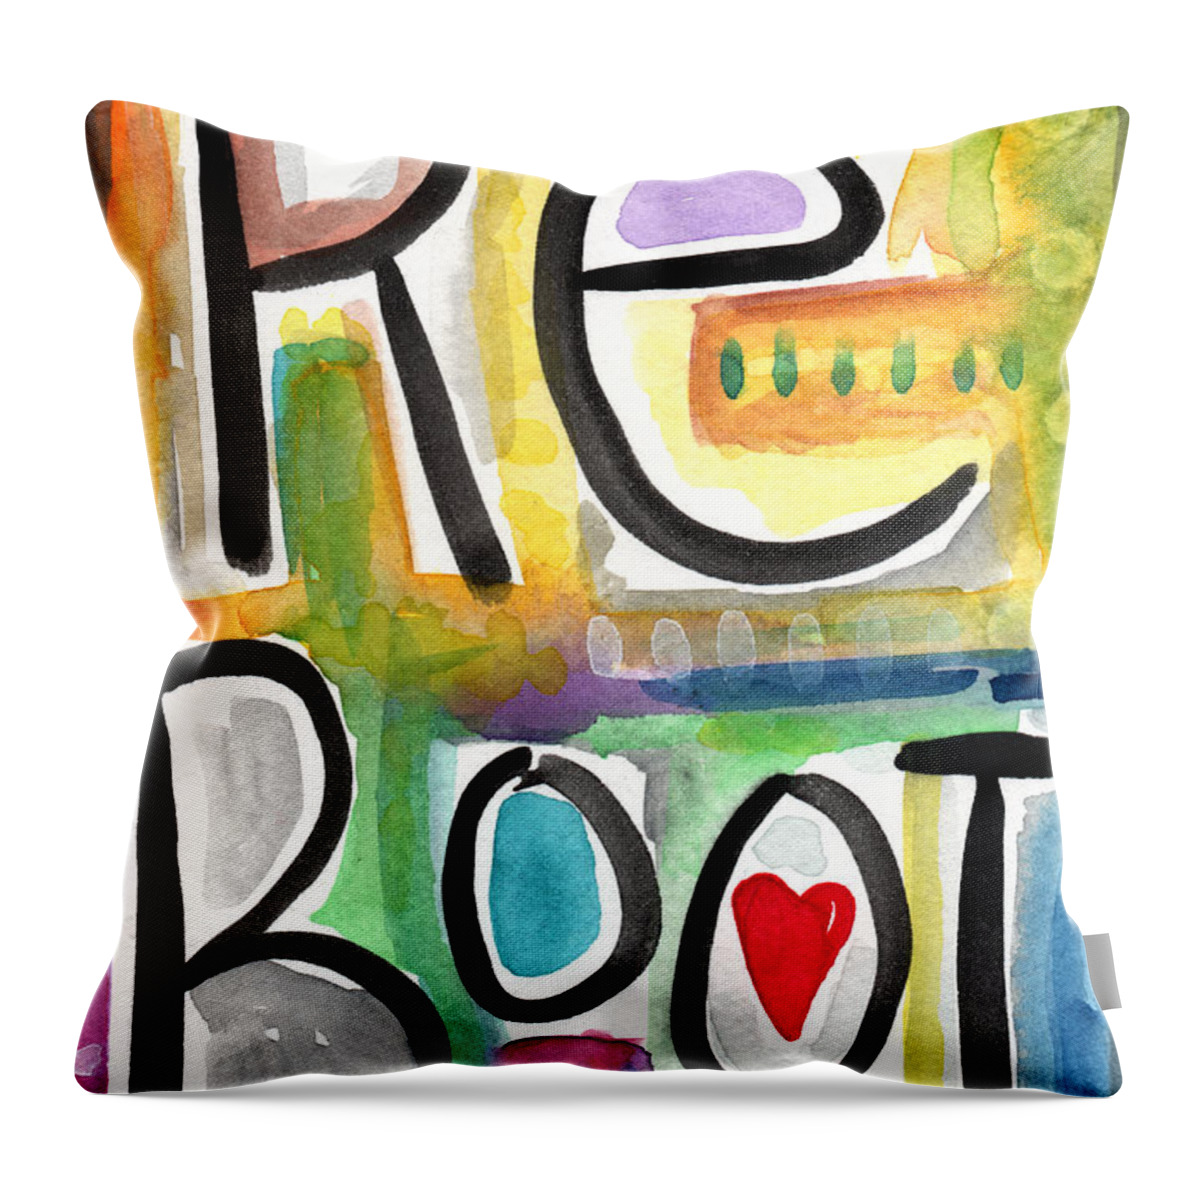 Reboot Throw Pillow featuring the painting Reboot by Linda Woods